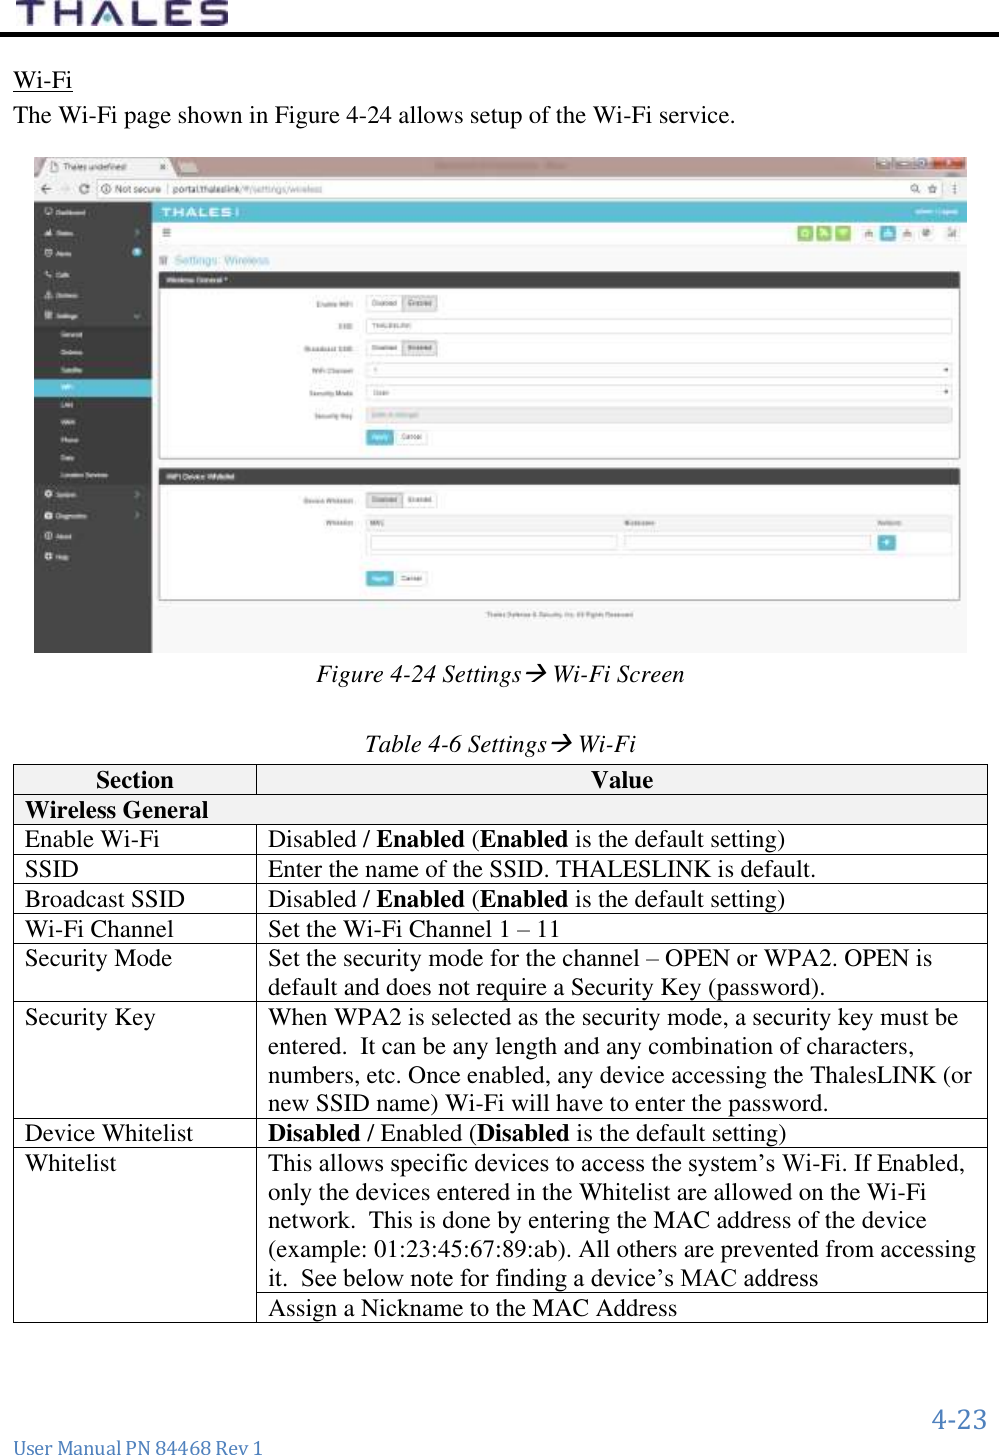      4-23 User Manual PN 84468 Rev 1 Wi-Fi  The Wi-Fi page shown in Figure 4-24 allows setup of the Wi-Fi service.    Figure 4-24 Settings Wi-Fi Screen  Table 4-6 Settings Wi-Fi  Section Value Wireless General Enable Wi-Fi Disabled / Enabled (Enabled is the default setting) SSID Enter the name of the SSID. THALESLINK is default. Broadcast SSID Disabled / Enabled (Enabled is the default setting) Wi-Fi Channel Set the Wi-Fi Channel 1 – 11 Security Mode Set the security mode for the channel – OPEN or WPA2. OPEN is default and does not require a Security Key (password). Security Key  When WPA2 is selected as the security mode, a security key must be entered.  It can be any length and any combination of characters, numbers, etc. Once enabled, any device accessing the ThalesLINK (or new SSID name) Wi-Fi will have to enter the password. Device Whitelist Disabled / Enabled (Disabled is the default setting) Whitelist This allows specific devices to access the system’s Wi-Fi. If Enabled, only the devices entered in the Whitelist are allowed on the Wi-Fi network.  This is done by entering the MAC address of the device (example: 01:23:45:67:89:ab). All others are prevented from accessing it.  See below note for finding a device’s MAC address Assign a Nickname to the MAC Address  